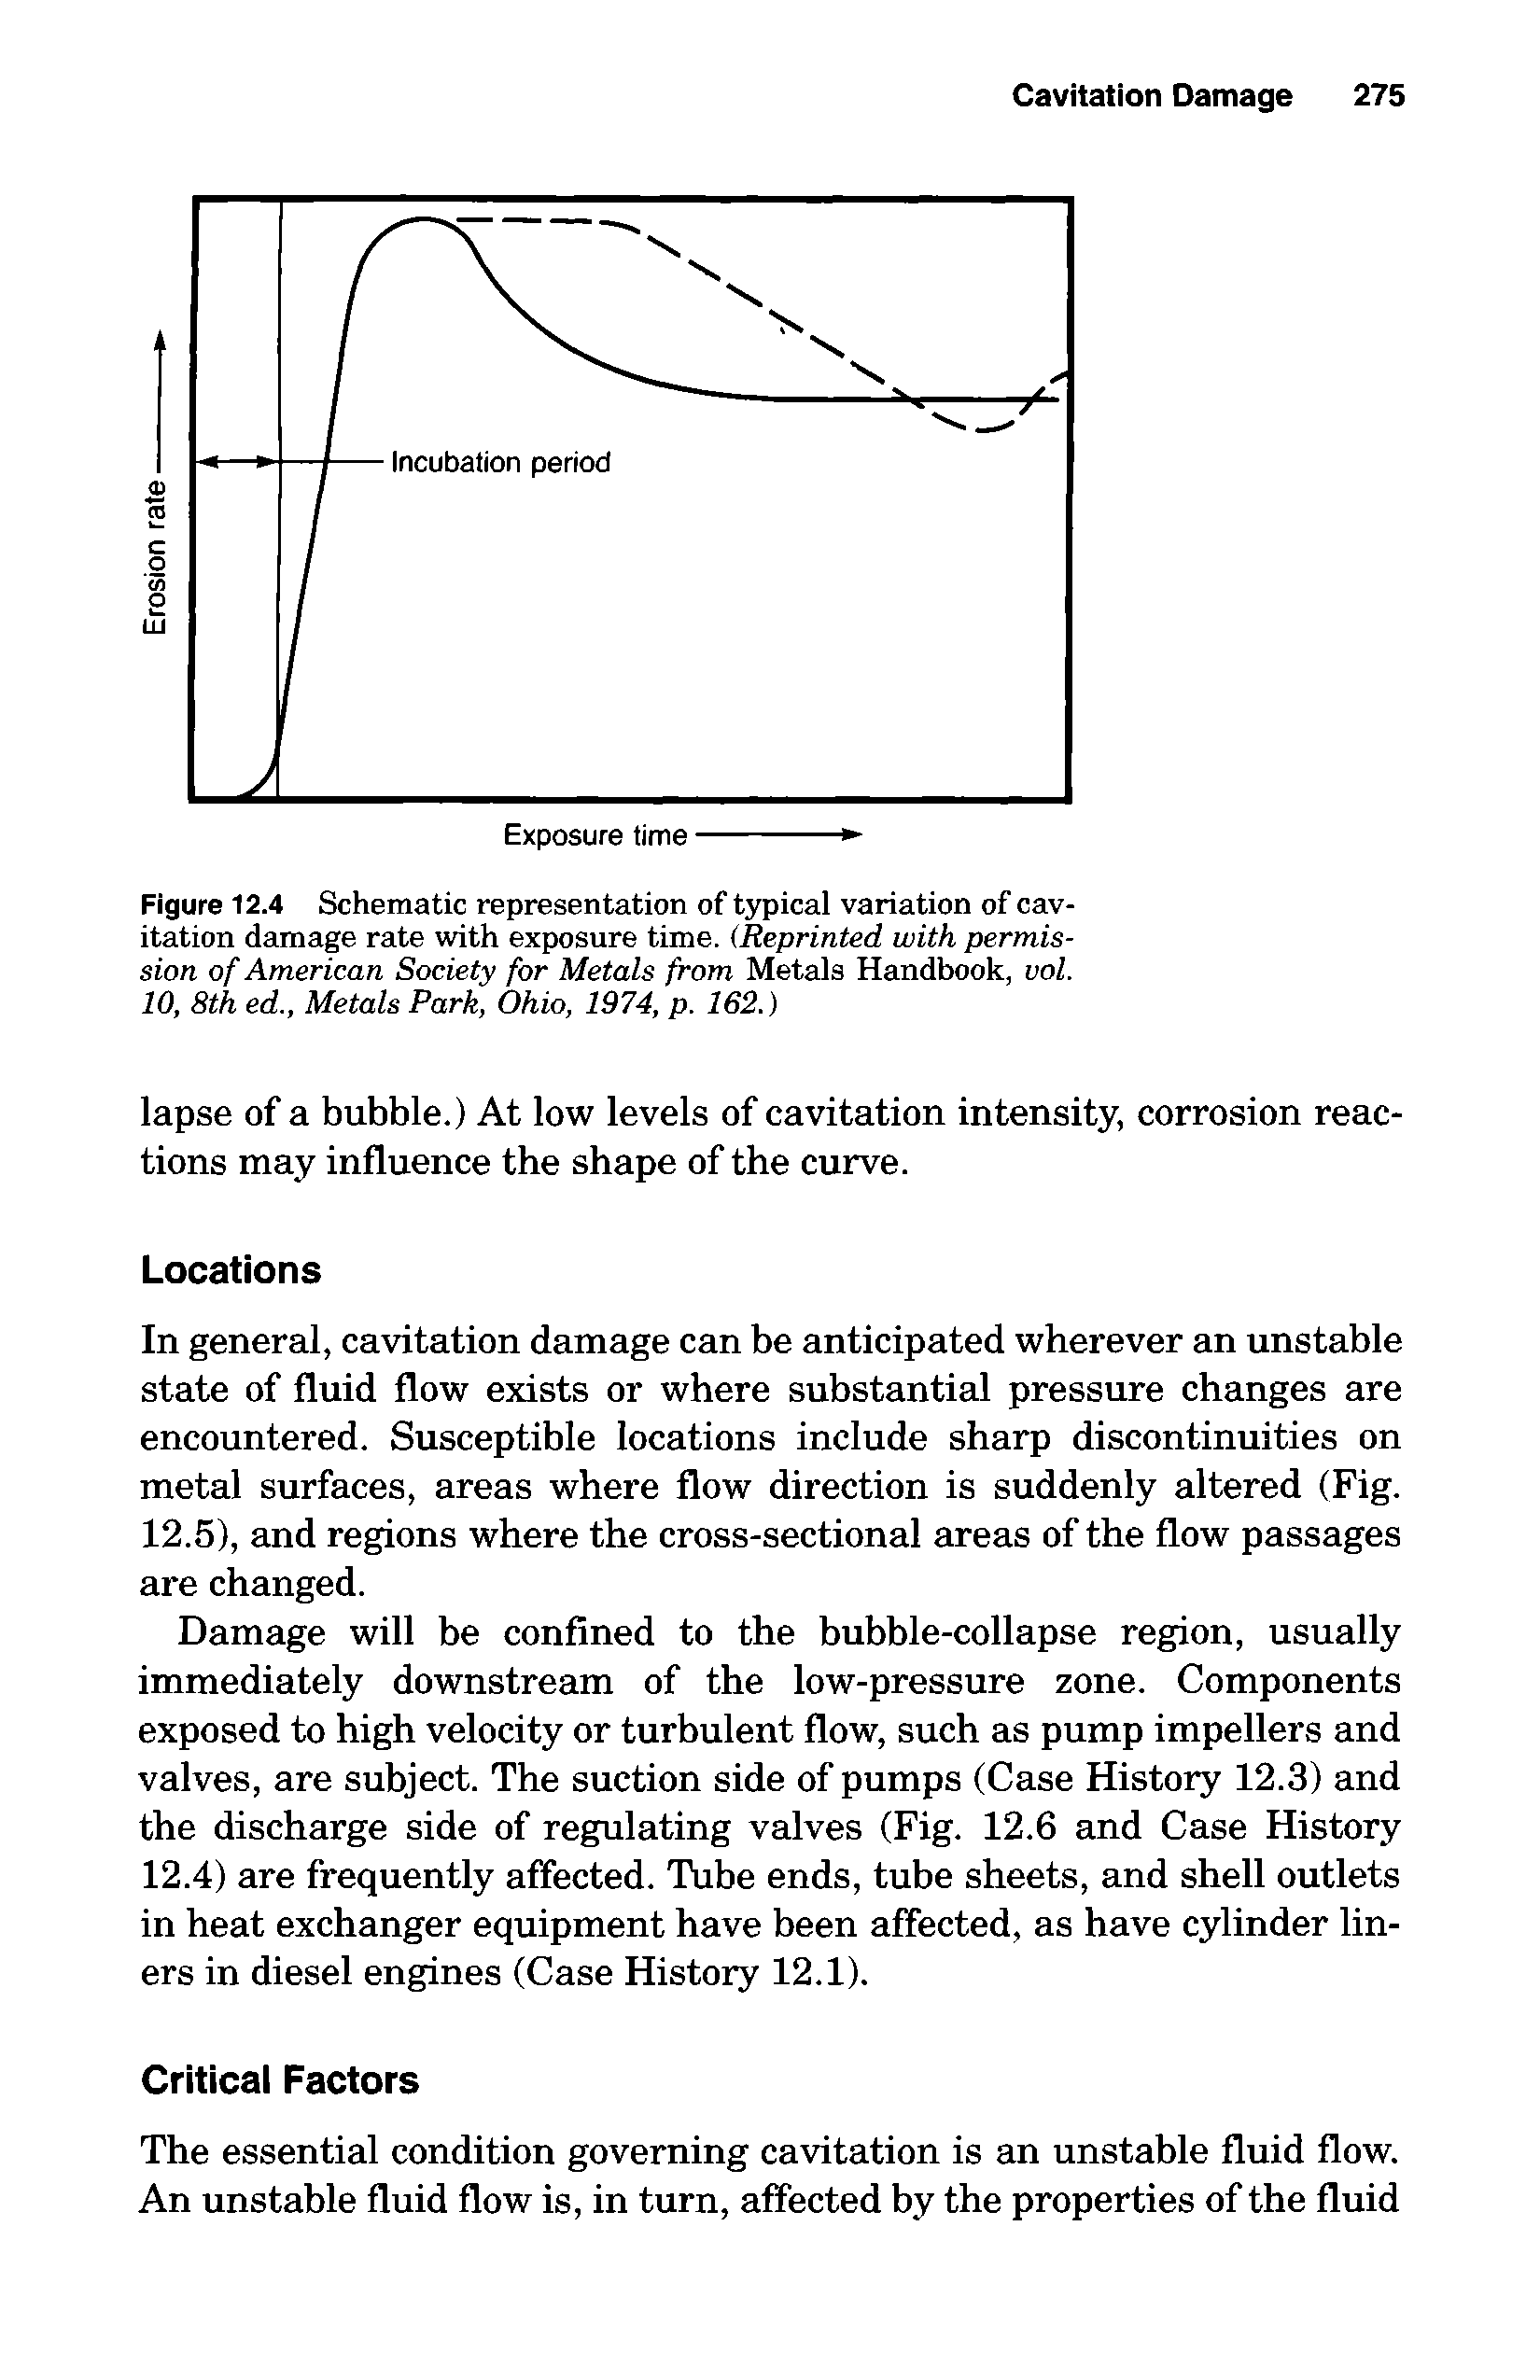 Figure 12.4 Schematic representation of typical variation of cavitation damage rate with exposure time. (Reprinted with permission of American Society for Metals from Metals Handbook, vol. 10, 8th ed.. Metals Park, Ohio, 1974, p. 162.)...